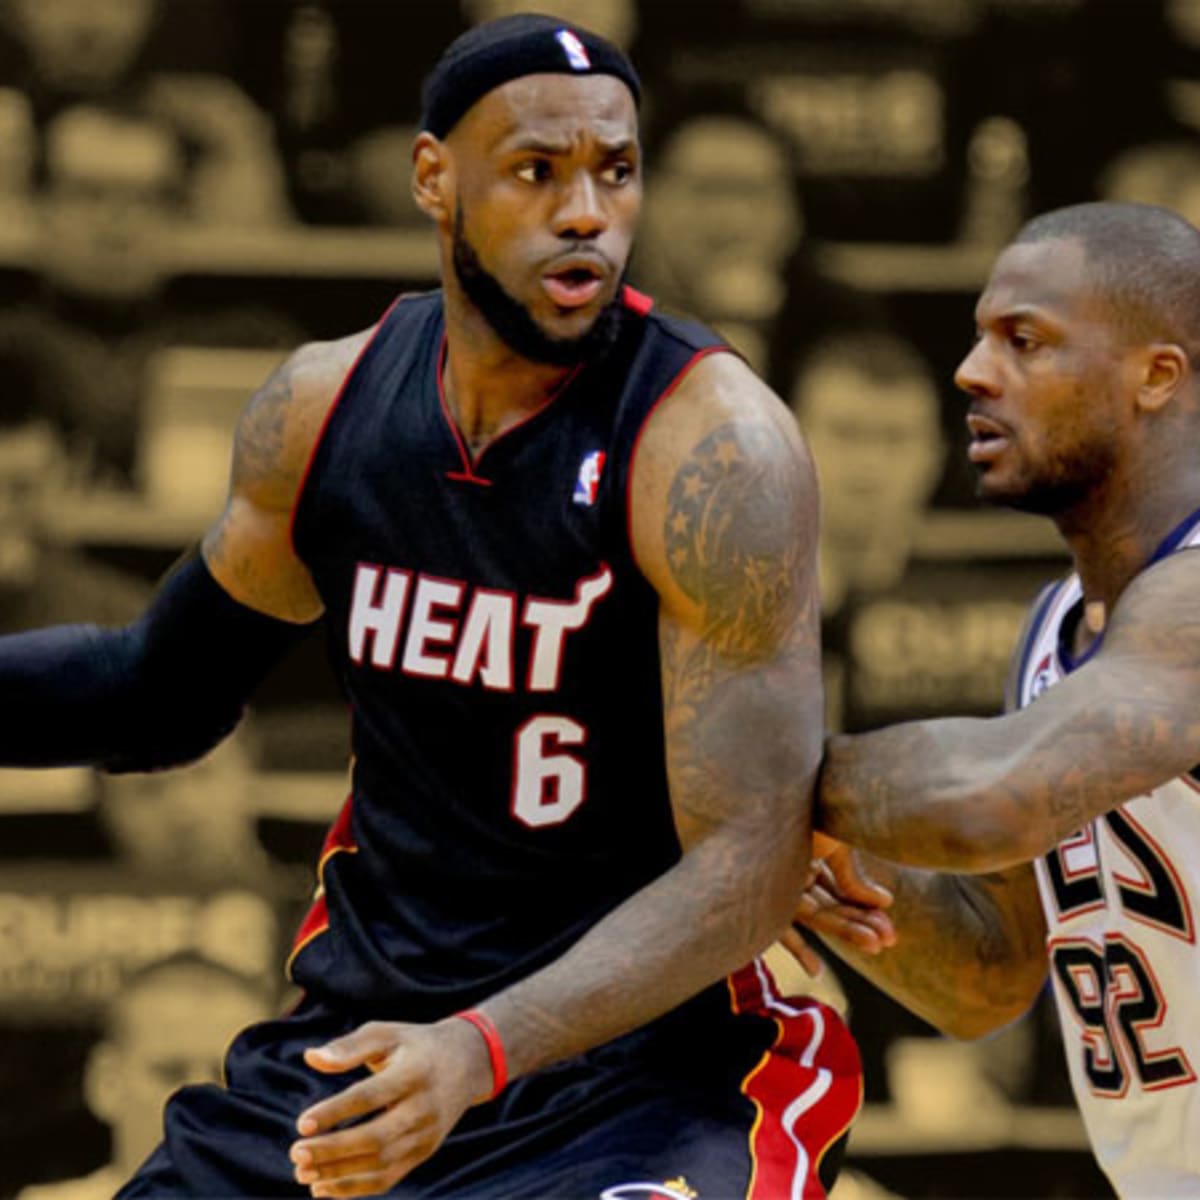 We was both making a fool of ourselves” — Why DeShawn Stevenson apologized  for beefing with LeBron James - Basketball Network - Your daily dose of  basketball